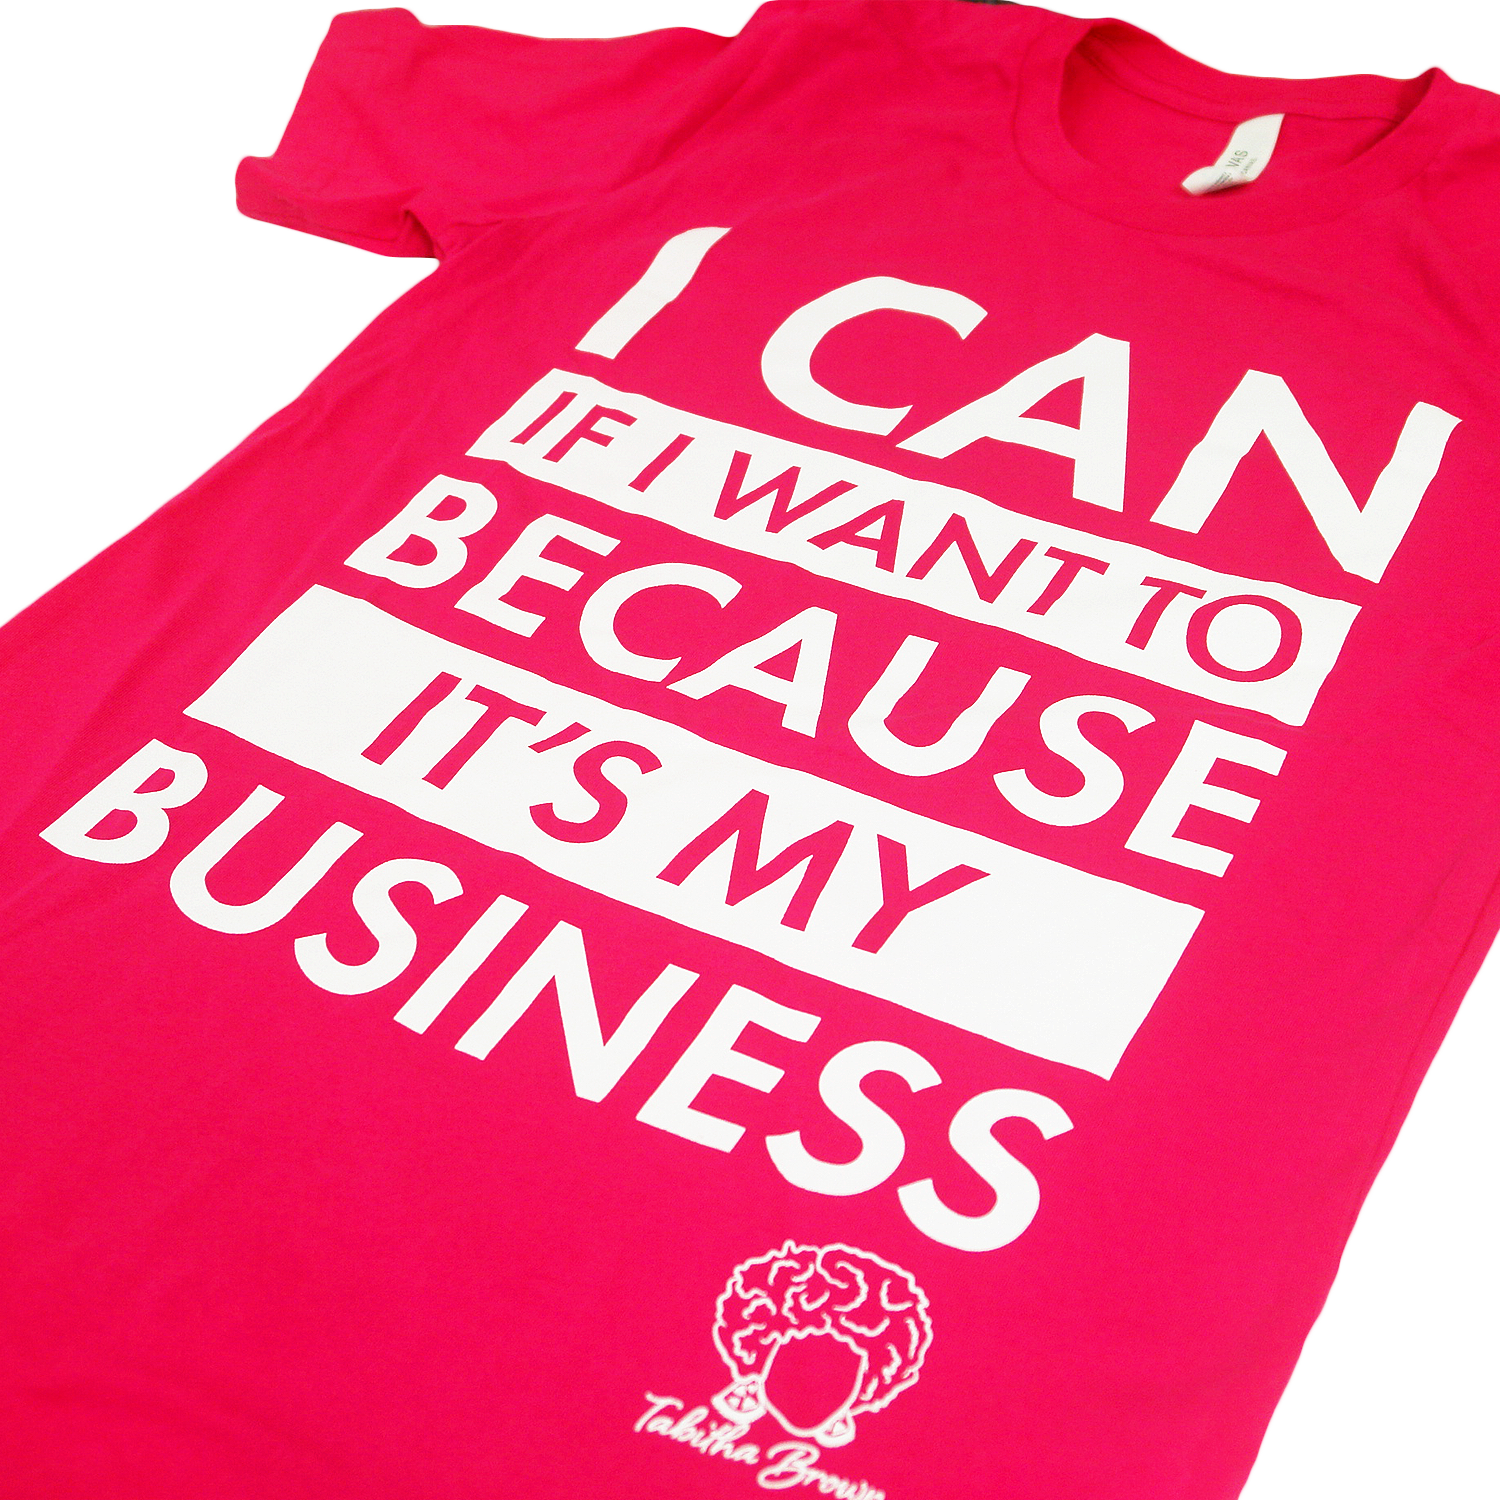 close up angled photo of image of heliconia tee shirt on clear background. full chest print in white that is stacked and reads "i can if i want to because it's my business" with tabitha brown's logo of her head with earrings and her name in cursive below on the right.